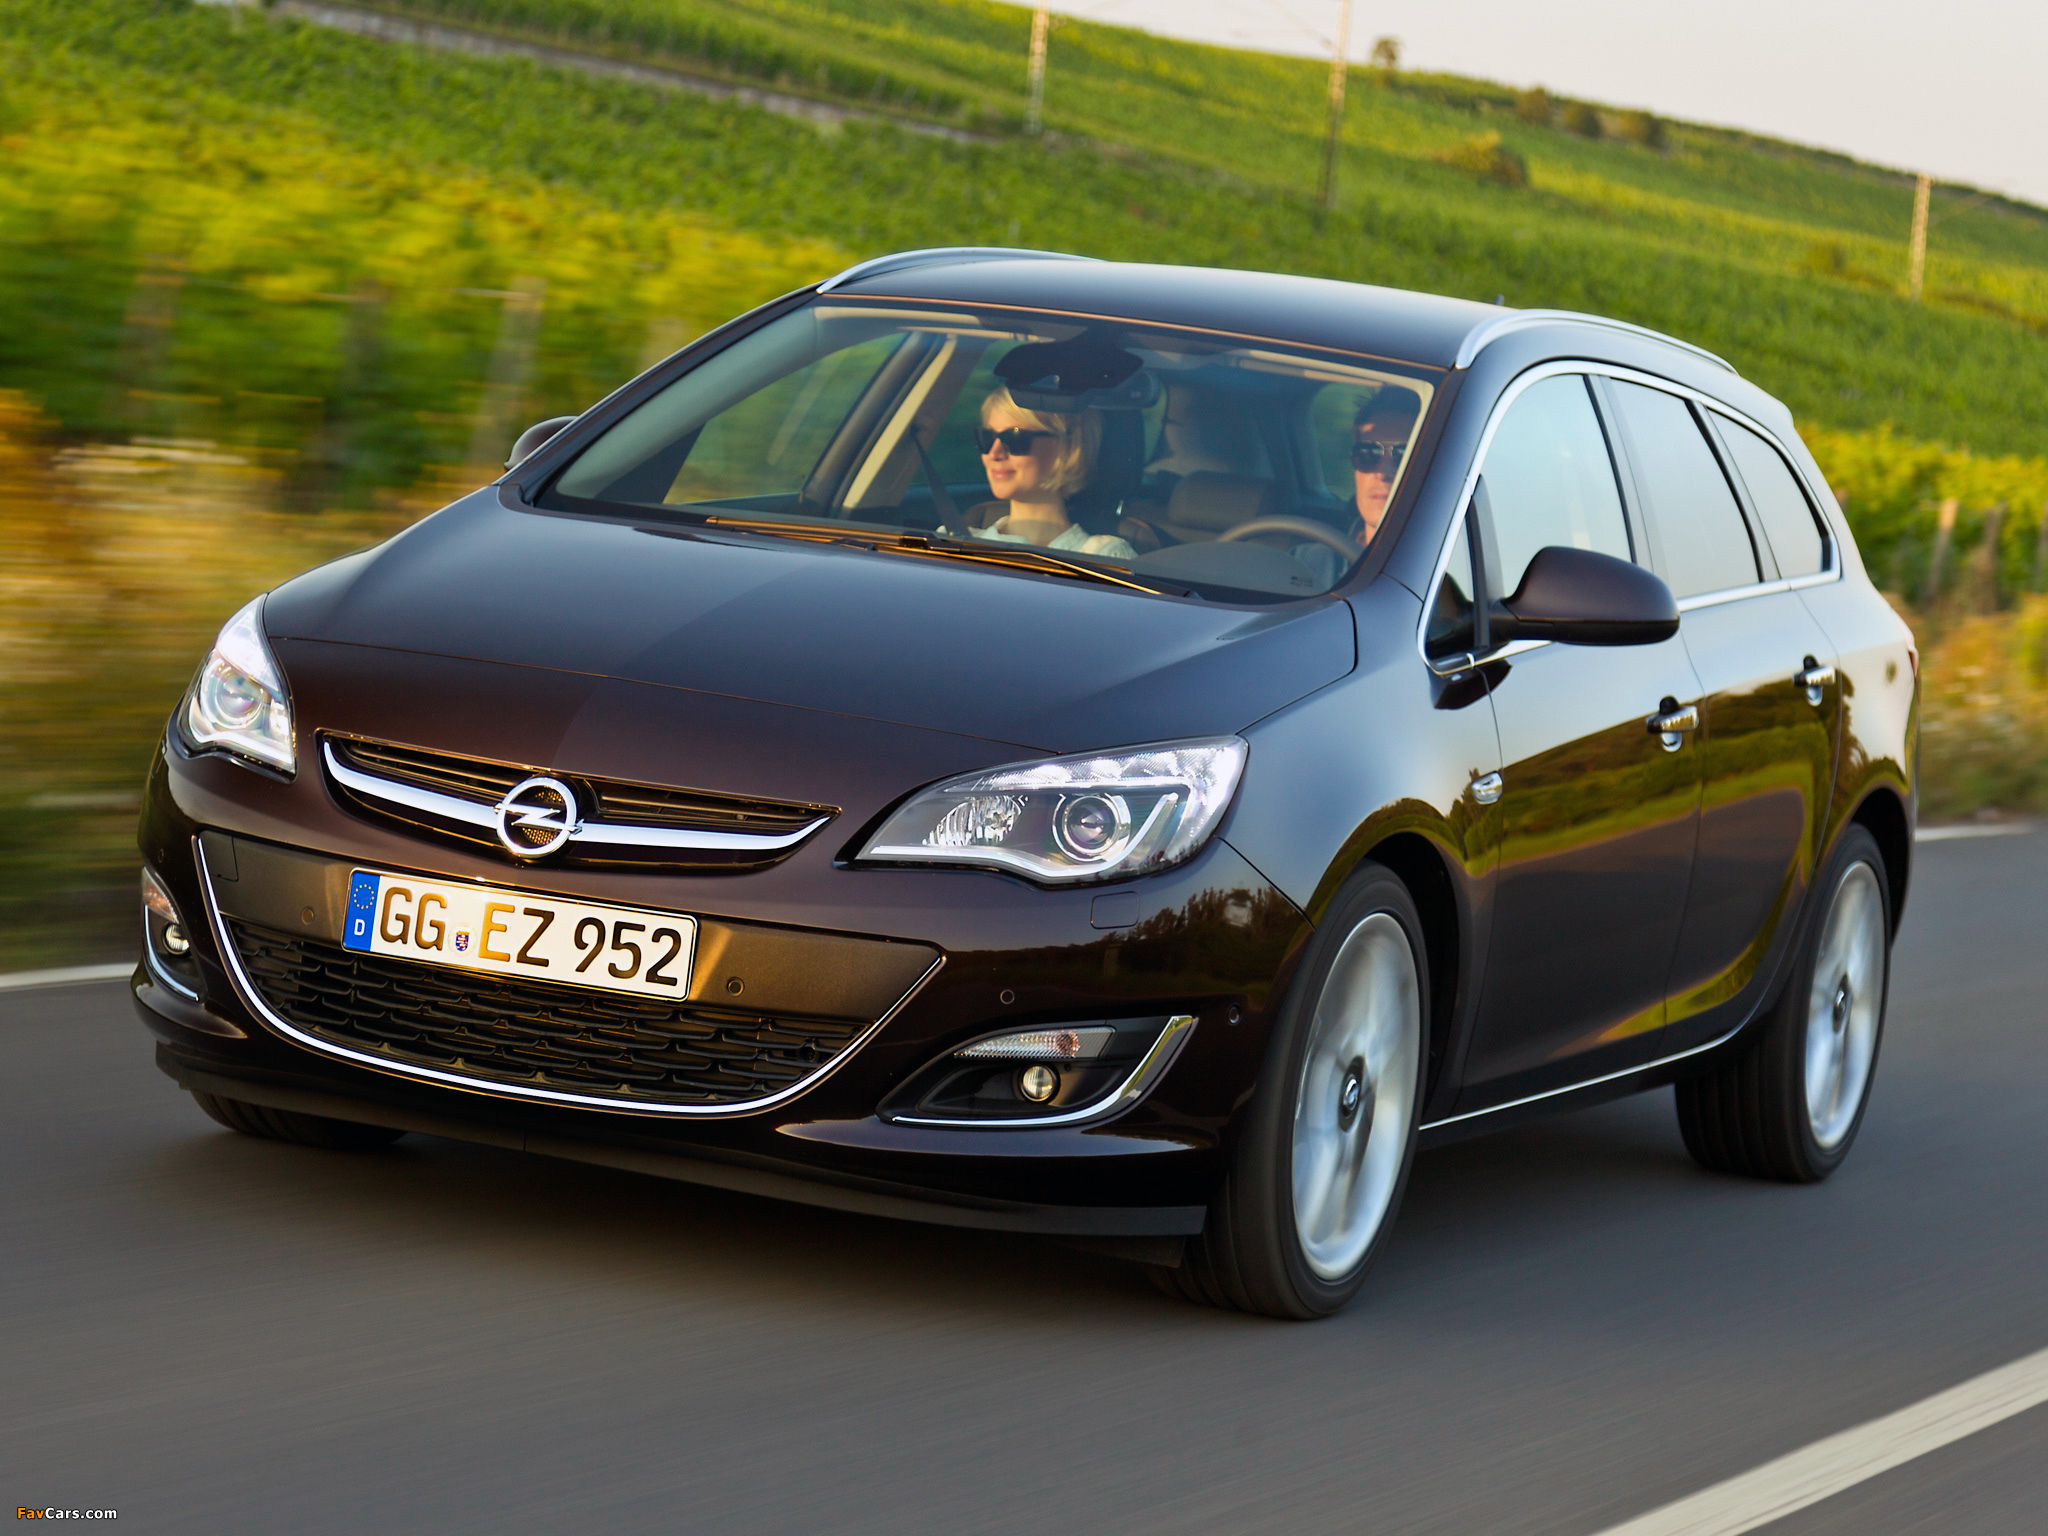 Astra 1.7 download. Opel Astra Sports Tourer 2012. Opel Astra j.